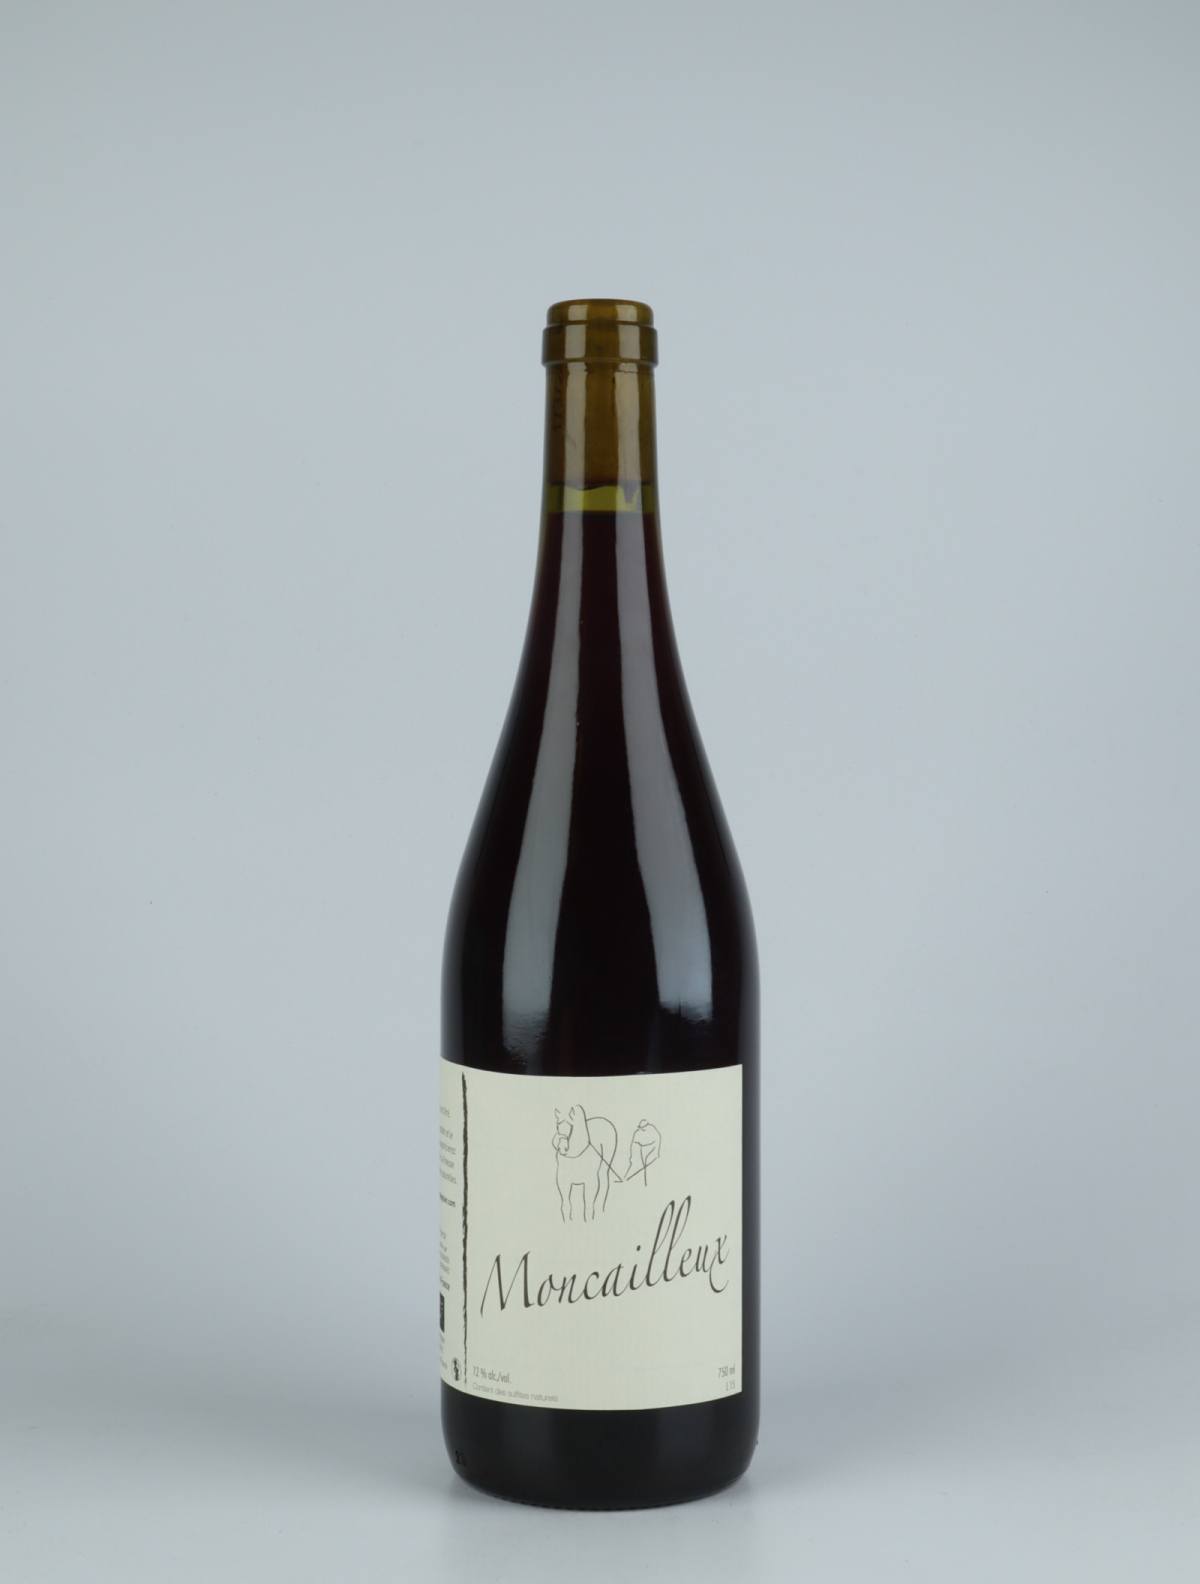 A bottle 2015 Moncailleux Red wine from Michel Guignier, Beaujolais in France